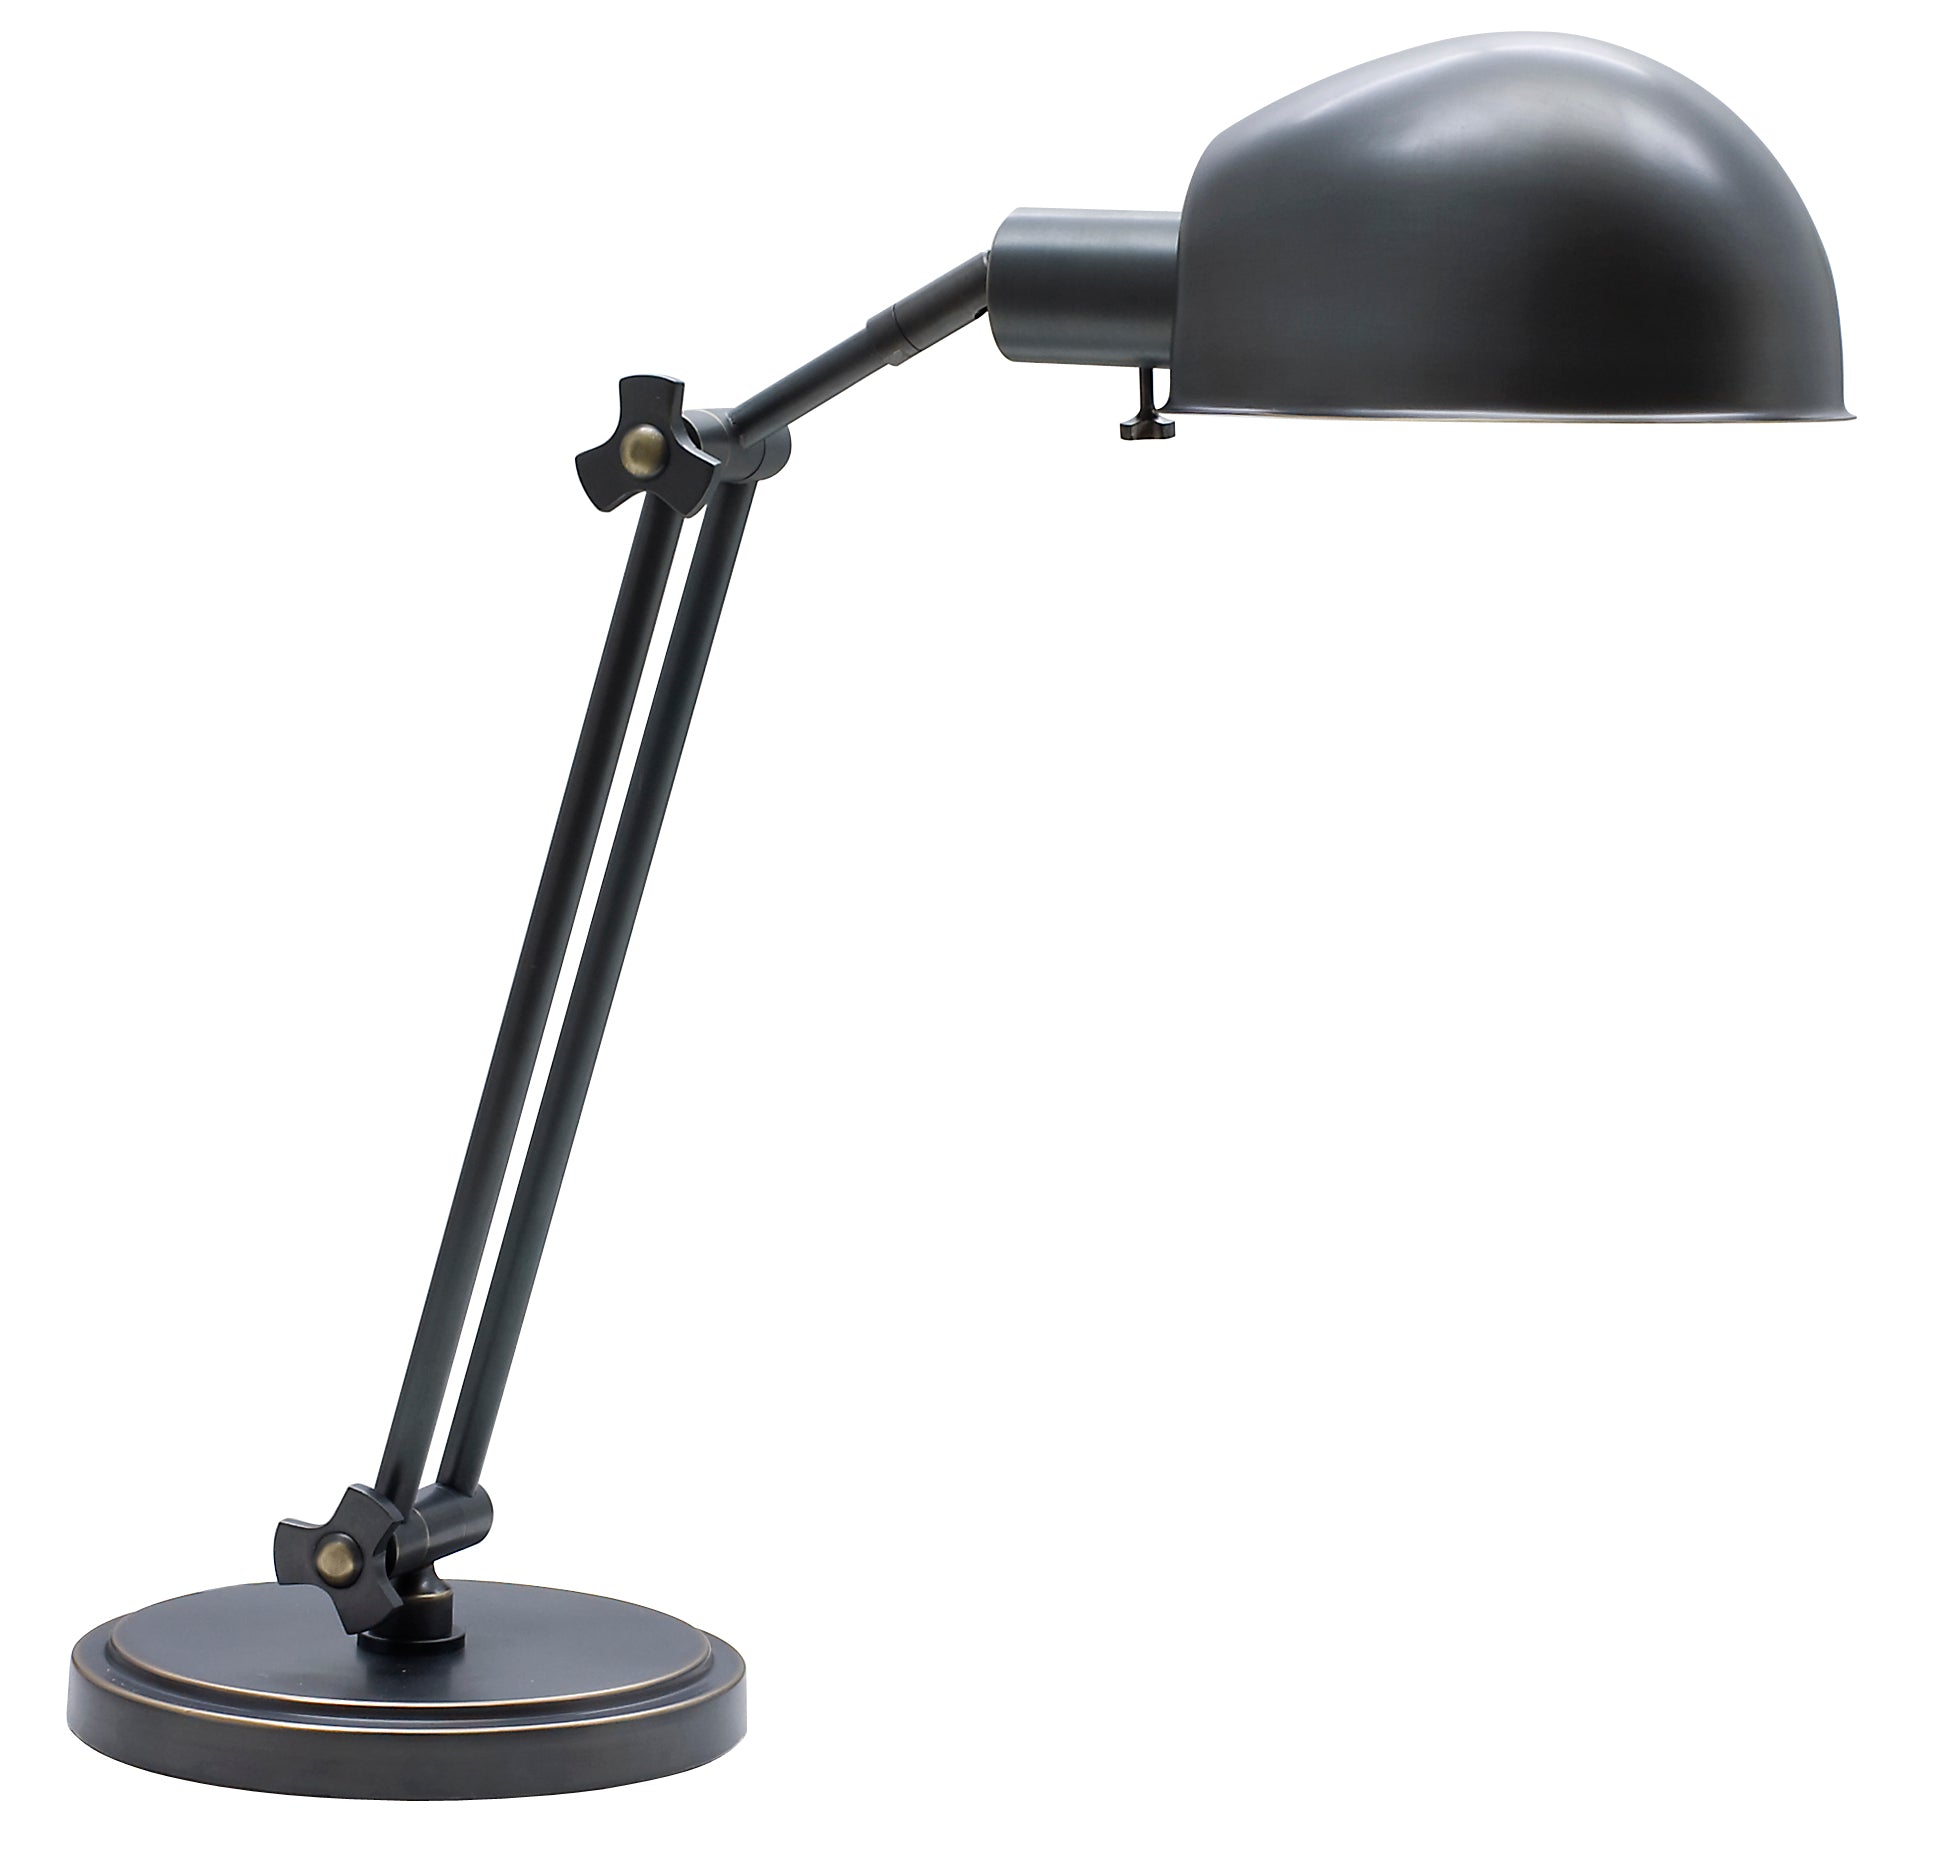 House of Troy Addison Adjustable Oil Rubbed Bronze Pharmacy Desk Lamp AD450-OB